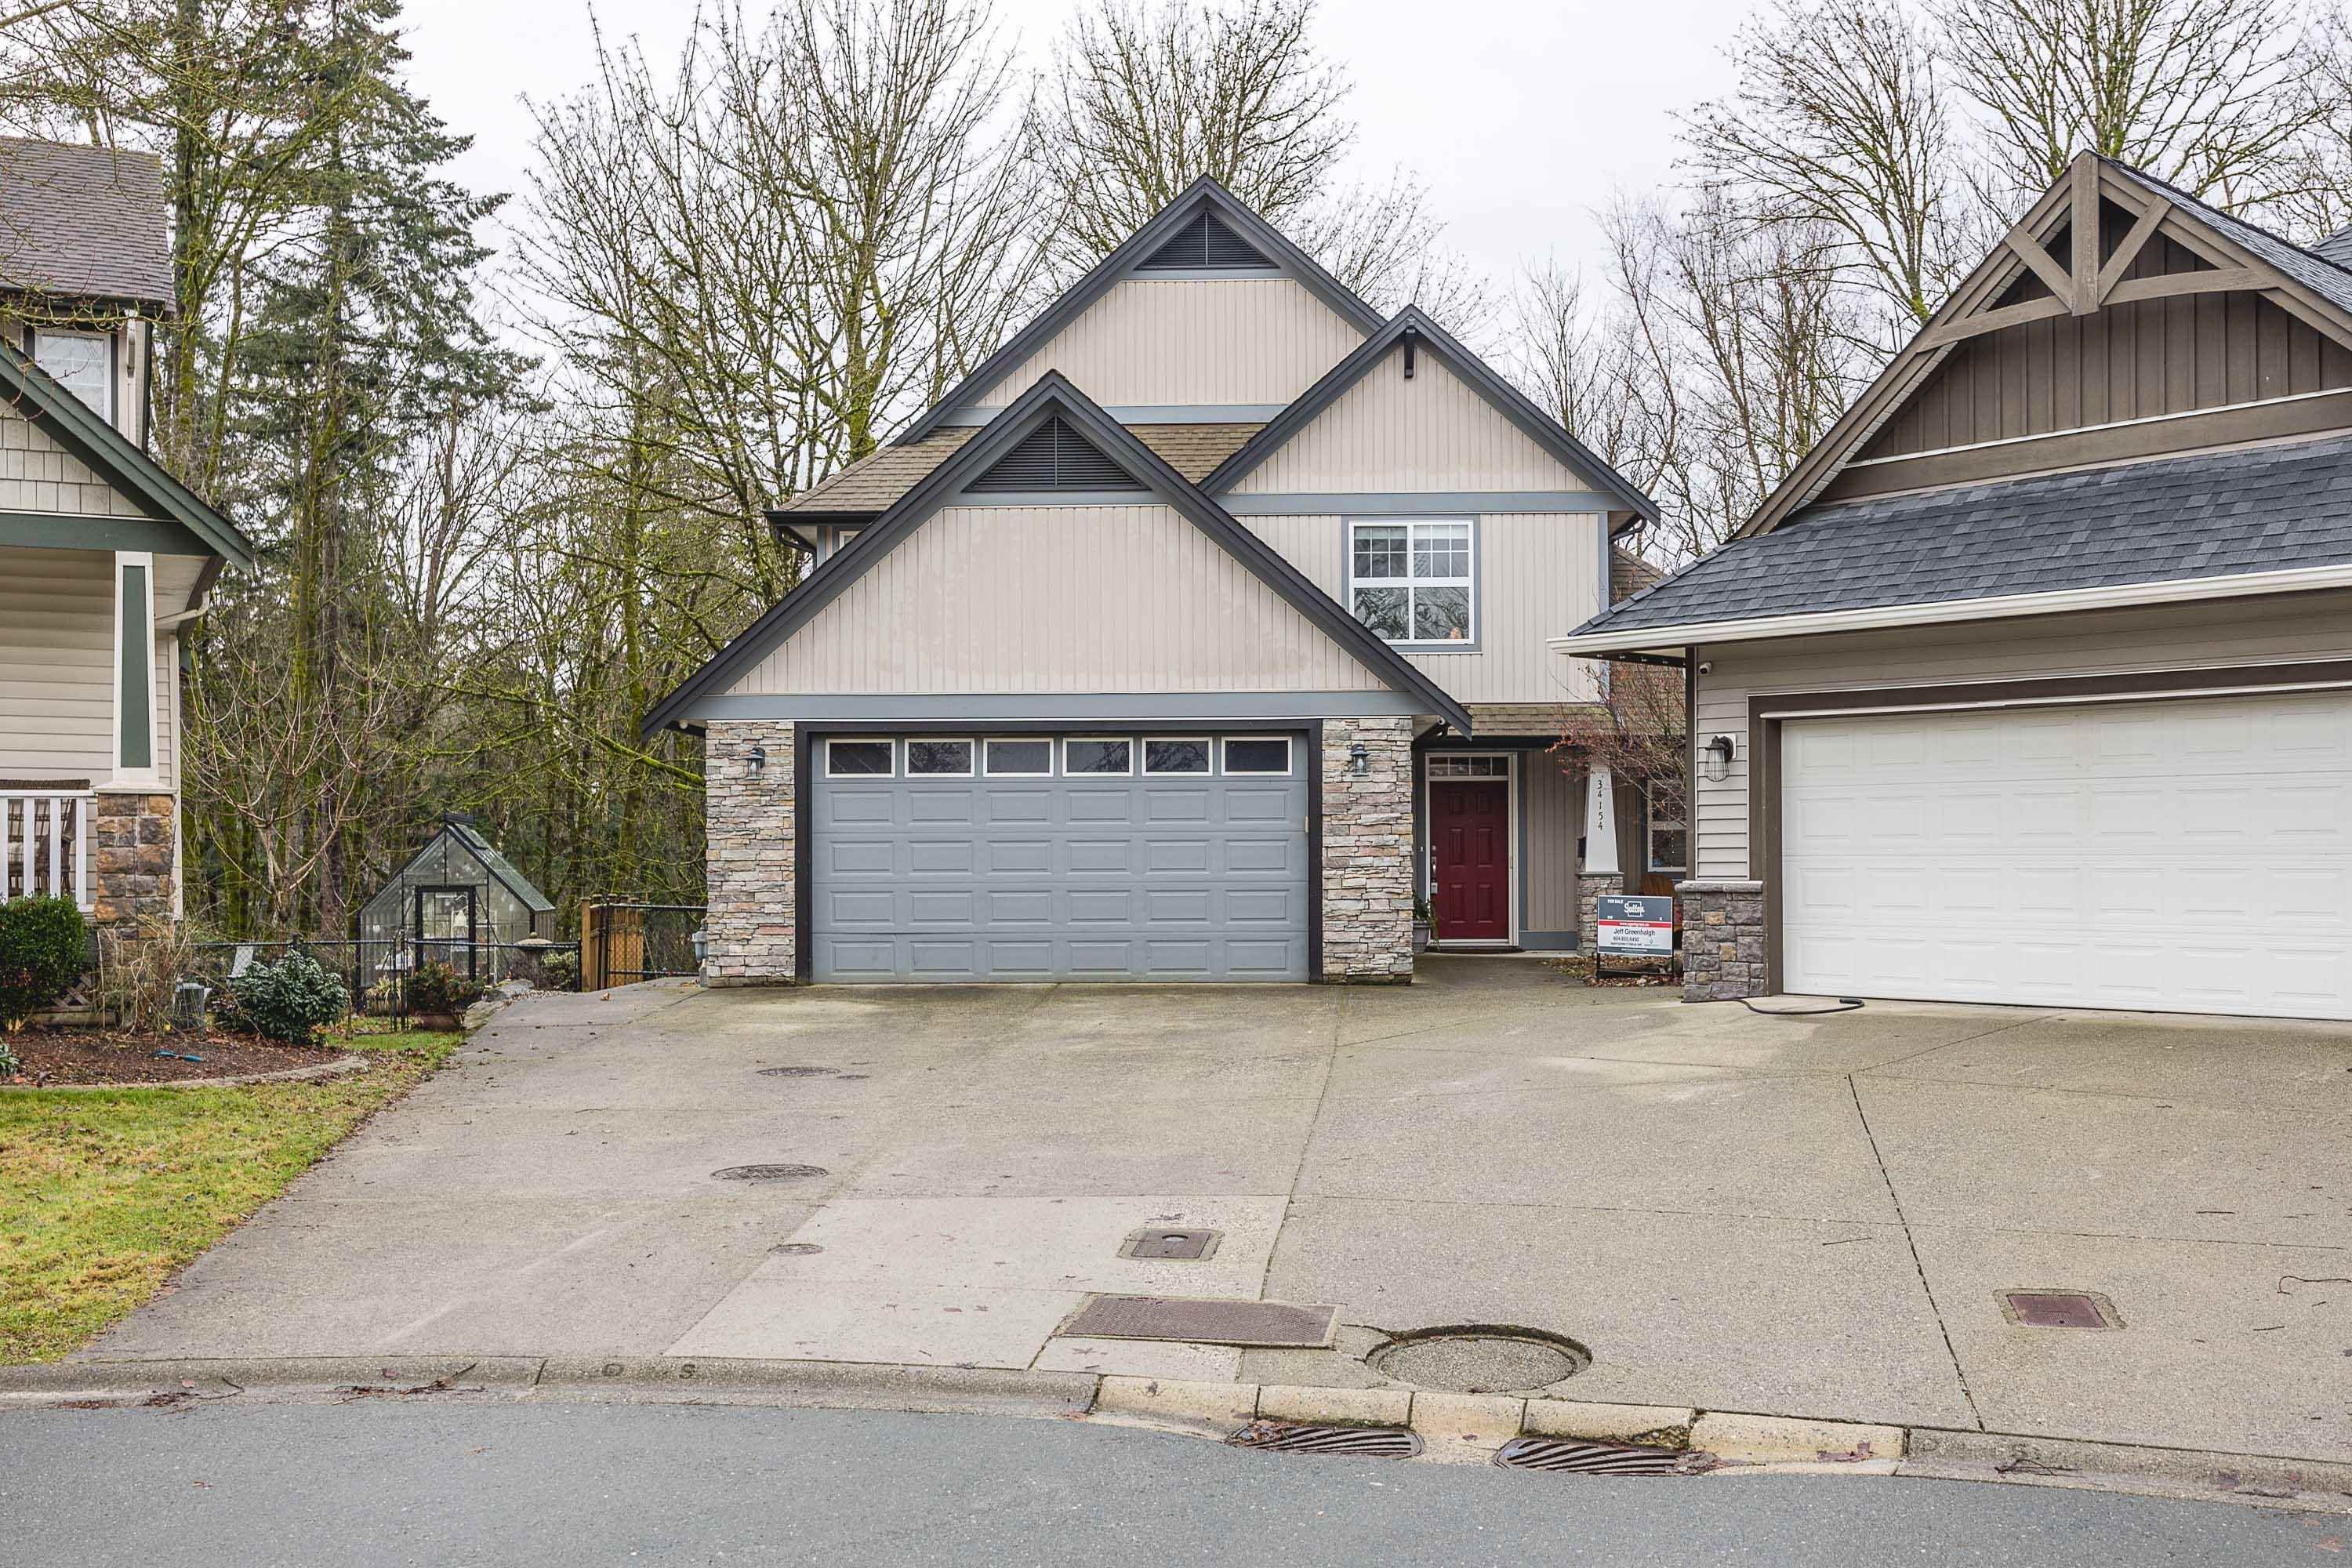 New property listed in Central Abbotsford, Abbotsford